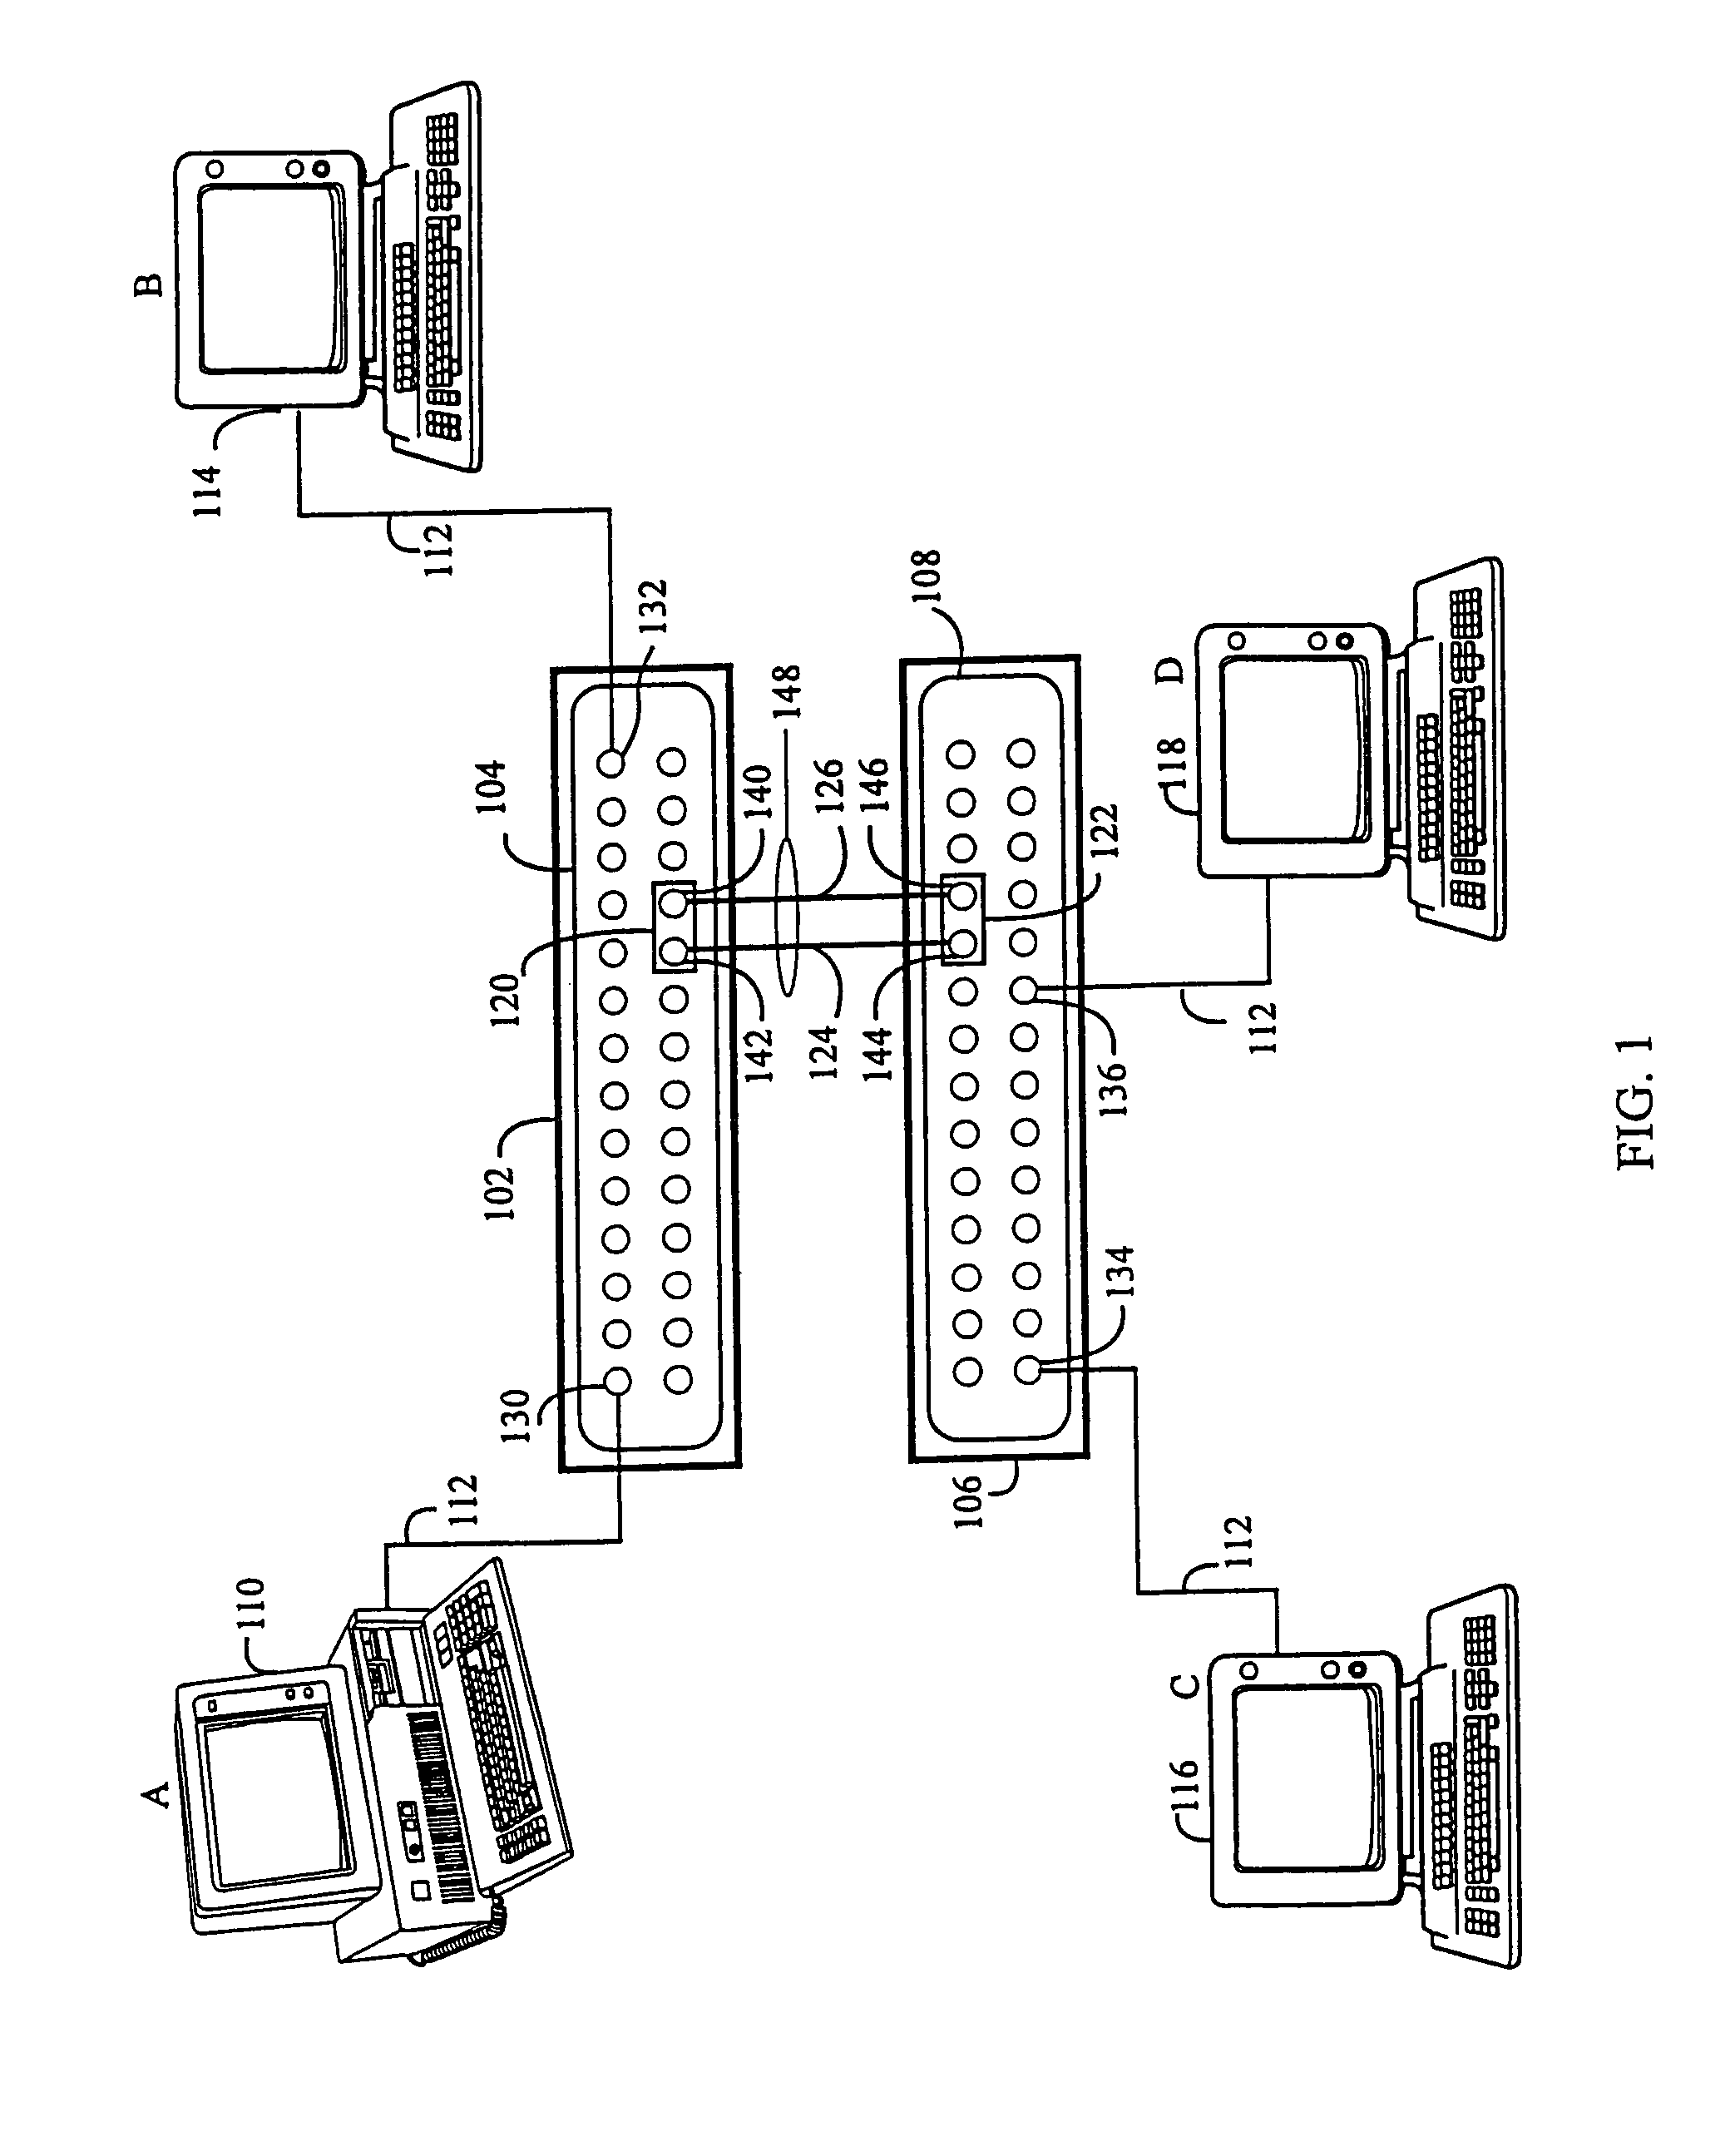 Network communication device including bonded ports for increased bandwidth